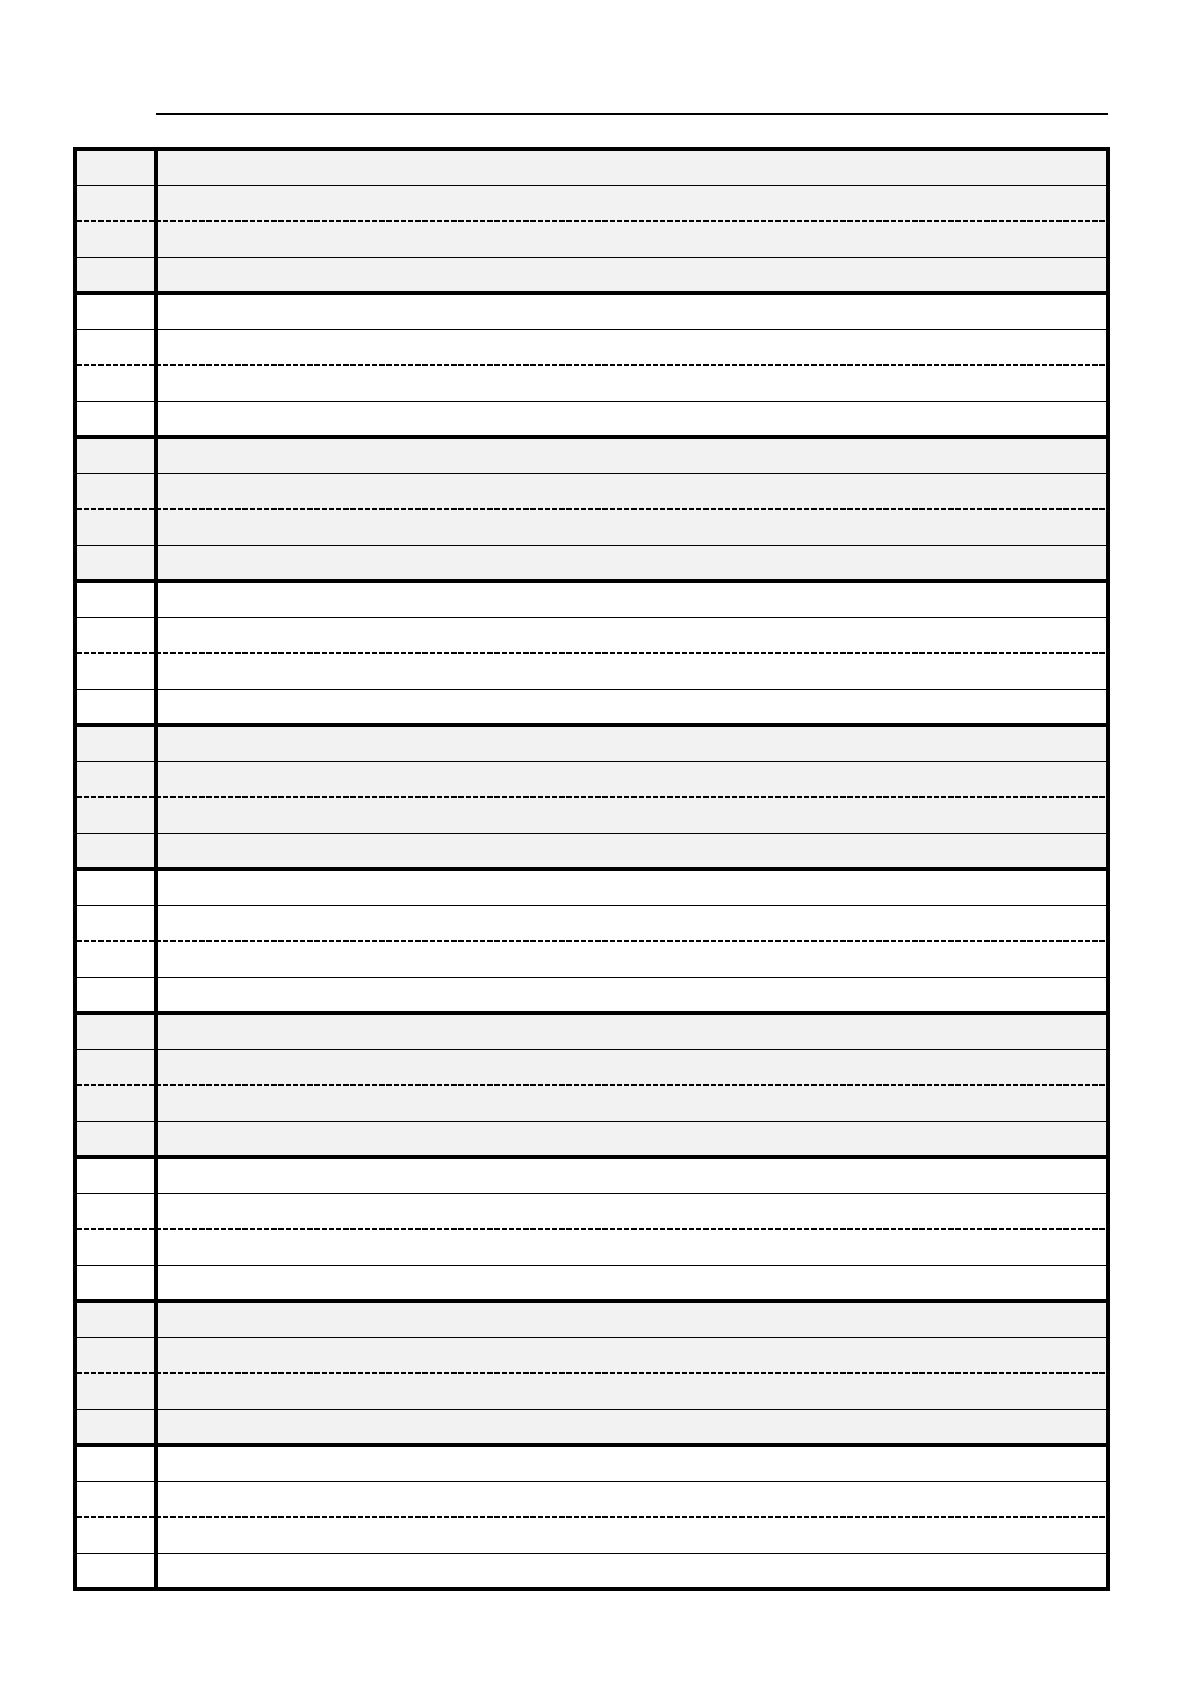 Download Daily Schedule Template - Edit, Fill, Sign Online ...